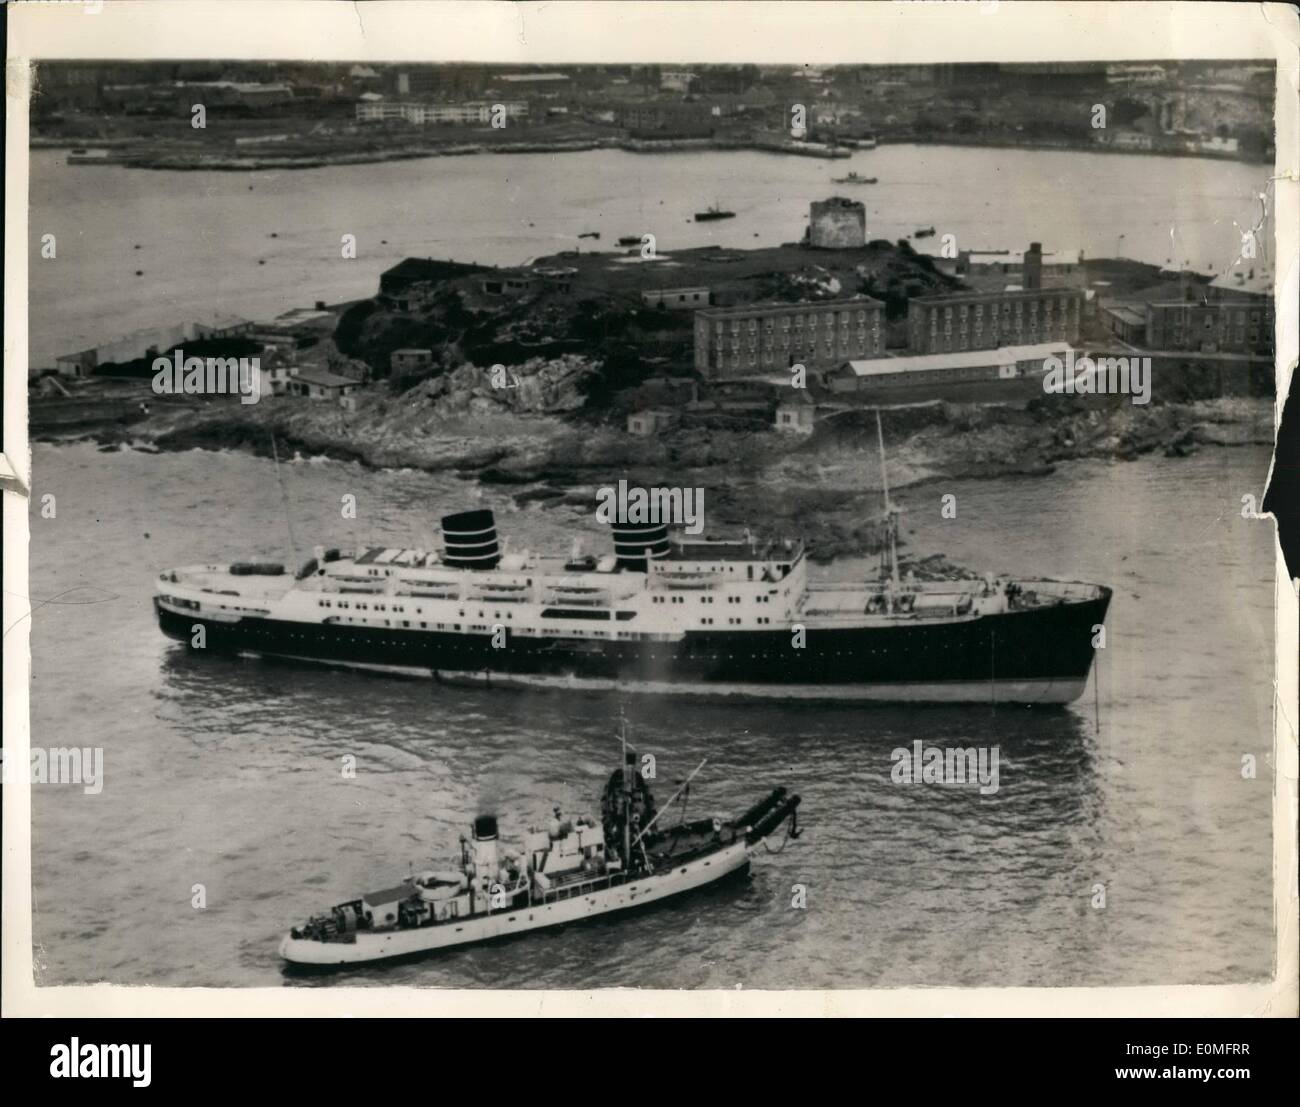 Mar. 03, 1955 - Norwegian Liner Aground Around Off Plymouth Hoe.. As seen from the Air: Never before has a liner come so close to Plymouth Hoe.. So close, in fact, that the 6,269 ton ''Venus'' is on the rocks. Twice yesterday tugs tried to re-float bar. This Morning's attempt left ''Venus'' as seen in this picture from the air... Five thousand people watched as tugs tried again last night- the linear lifted but remained fast on the rocks. Heavy gear and cargo is being removed to give her a better chance of being refloted at the next high tide. Stock Photo